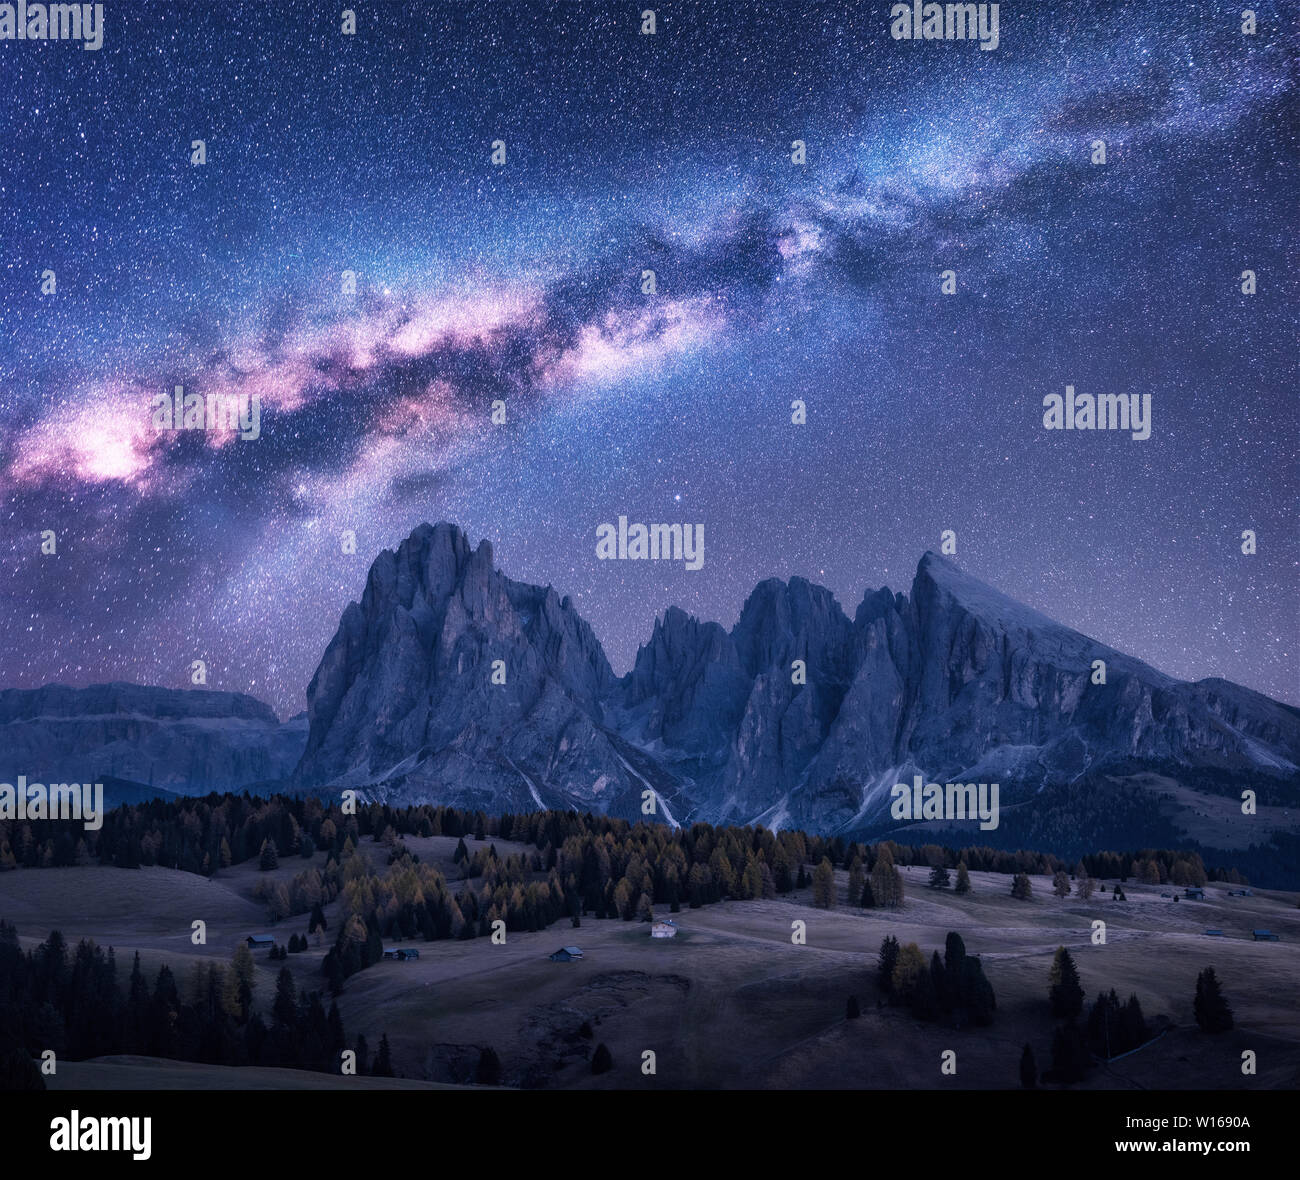 Milky Way over beautiful mauntains at night. Autumn landscape Stock Photo